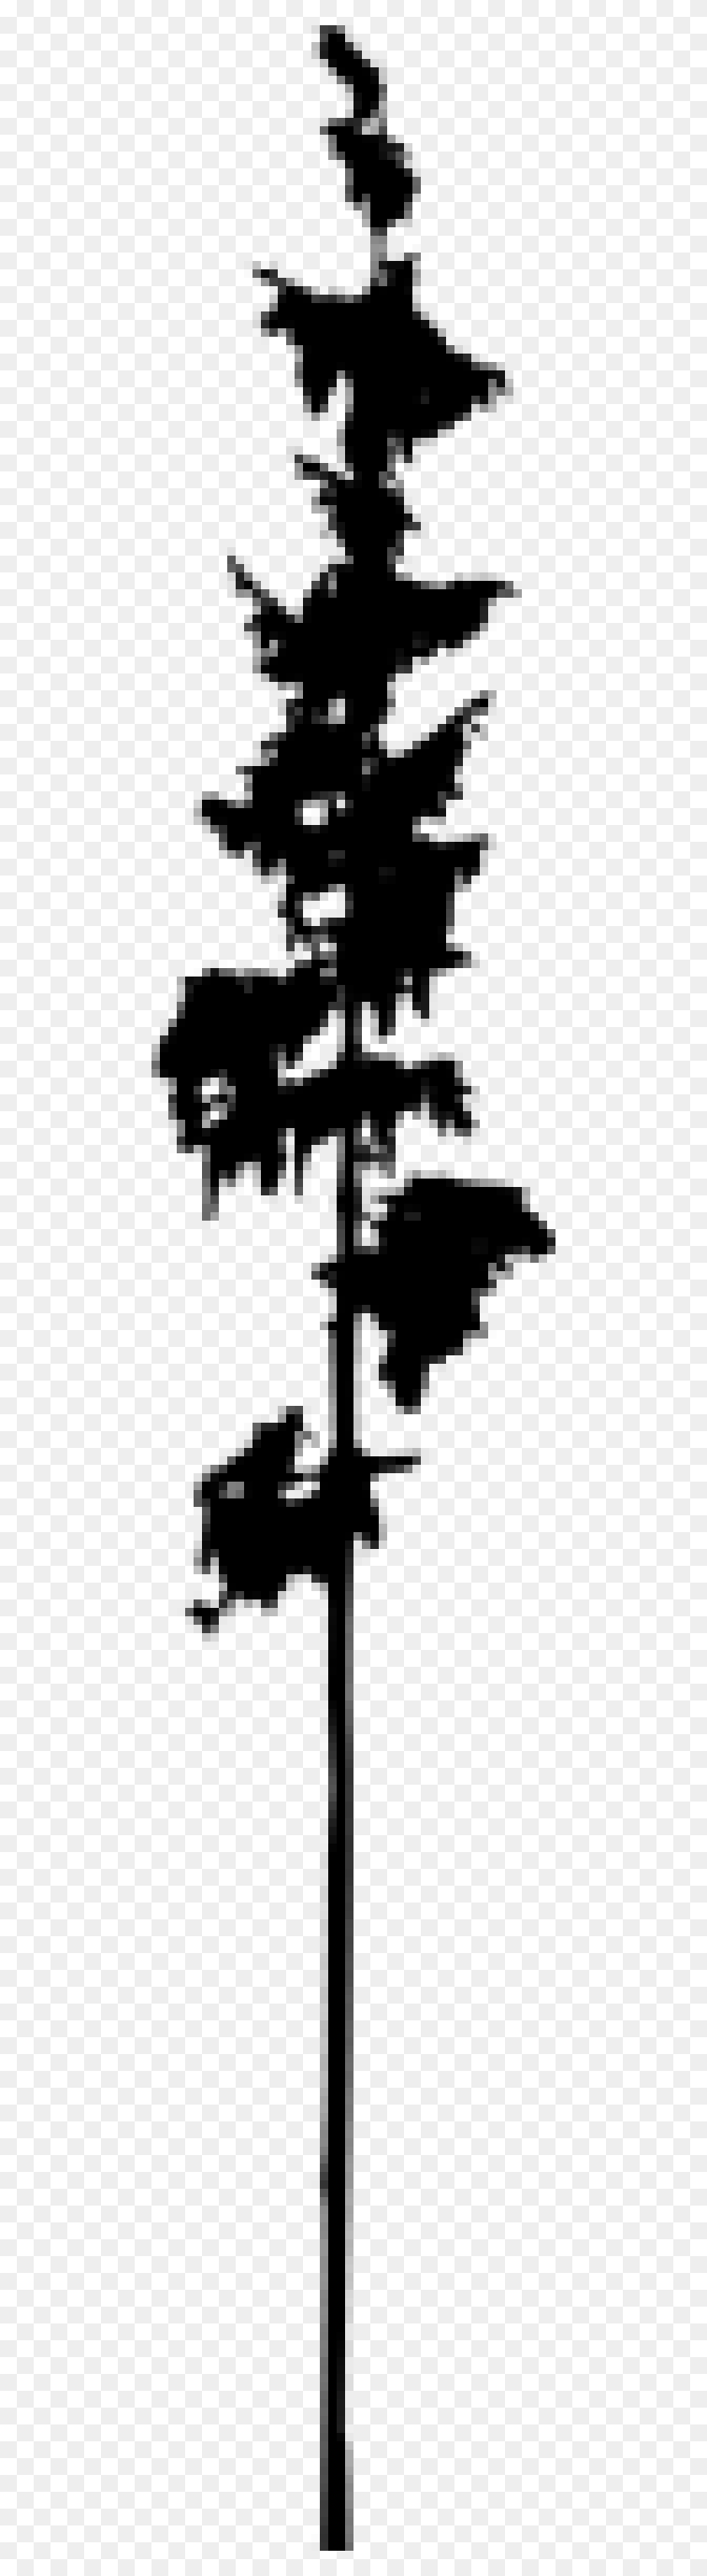 480x3000 Pine Tree Silhouette Png - Pine Tree Silhouette PNG